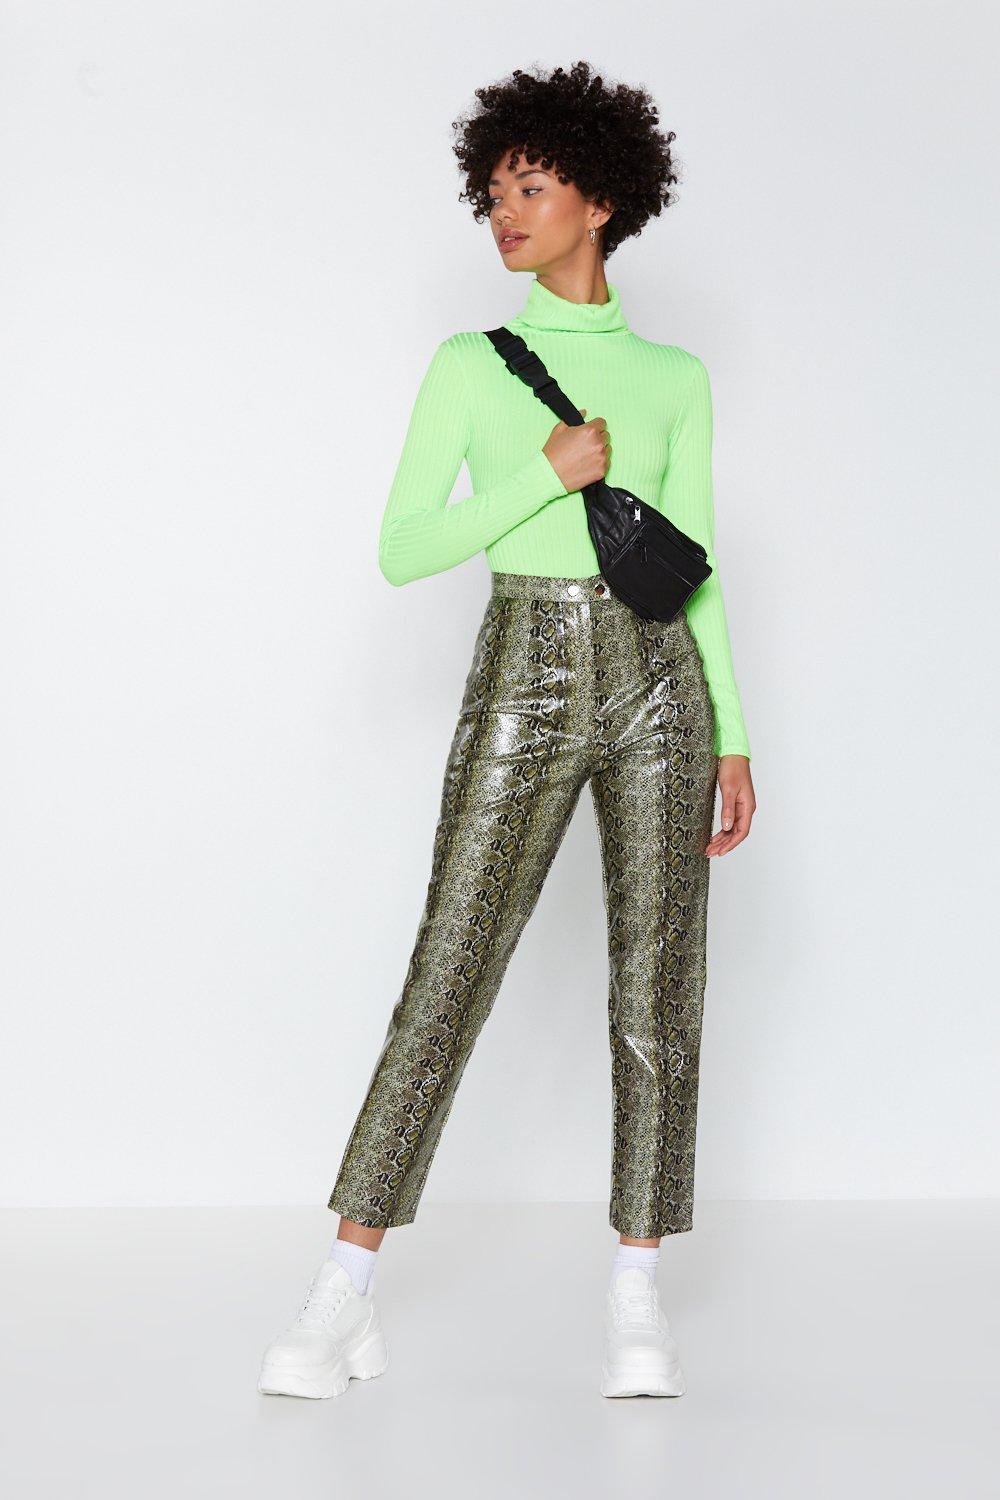 snake leather trousers